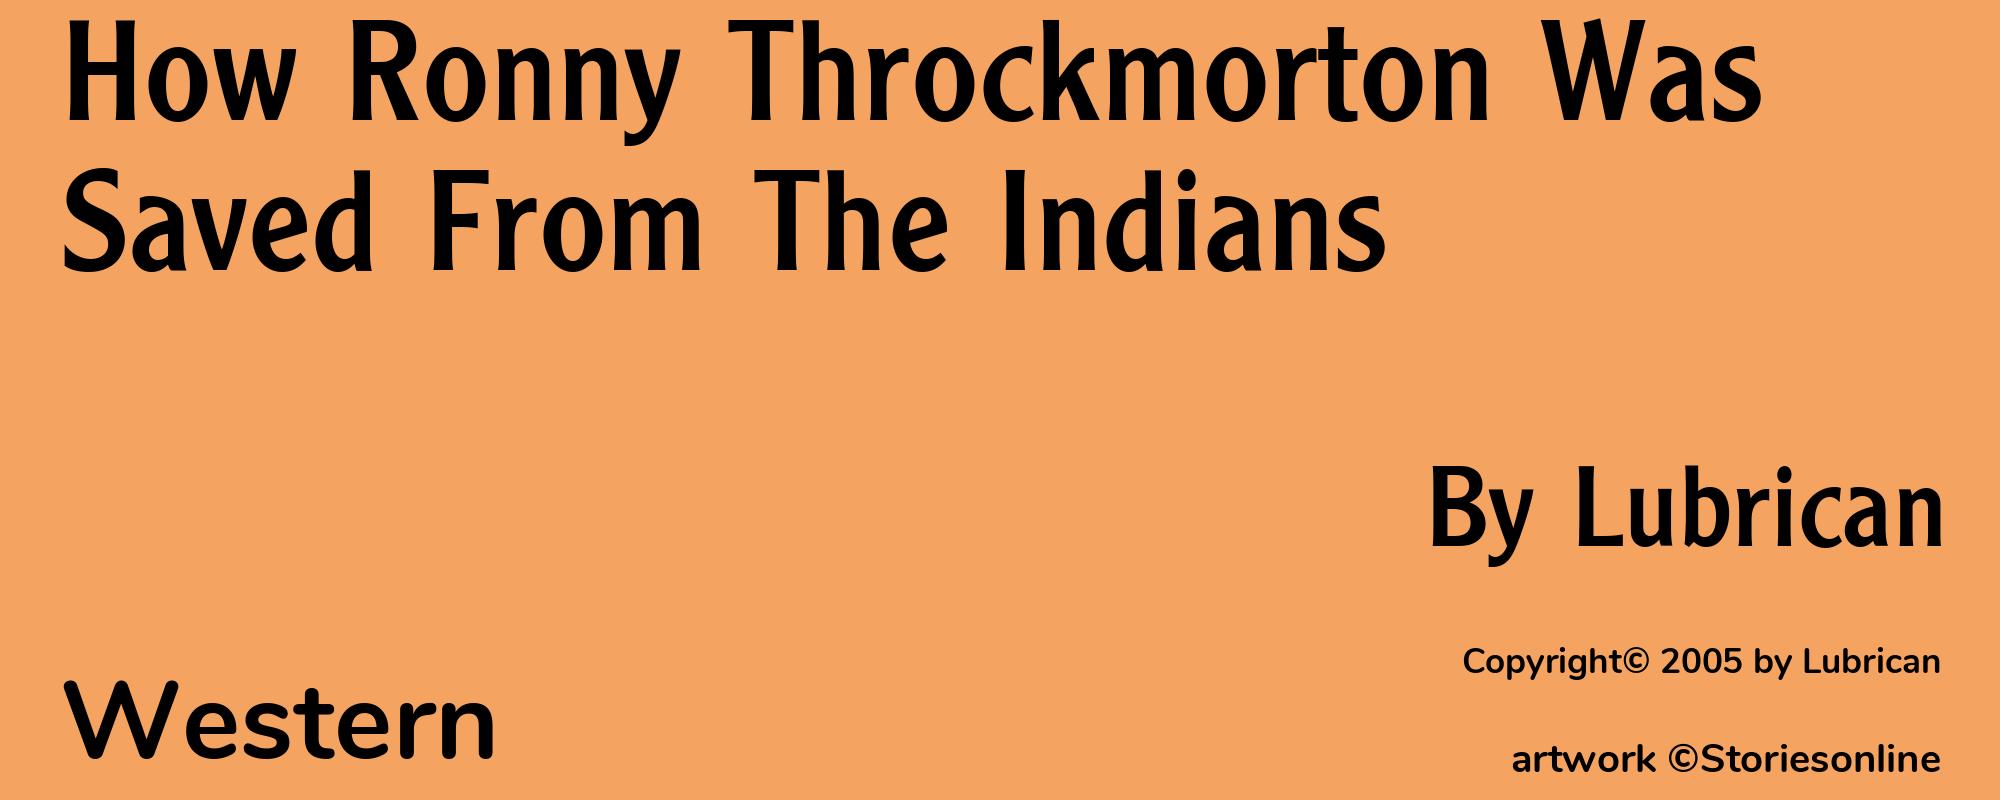 How Ronny Throckmorton Was Saved From The Indians - Cover